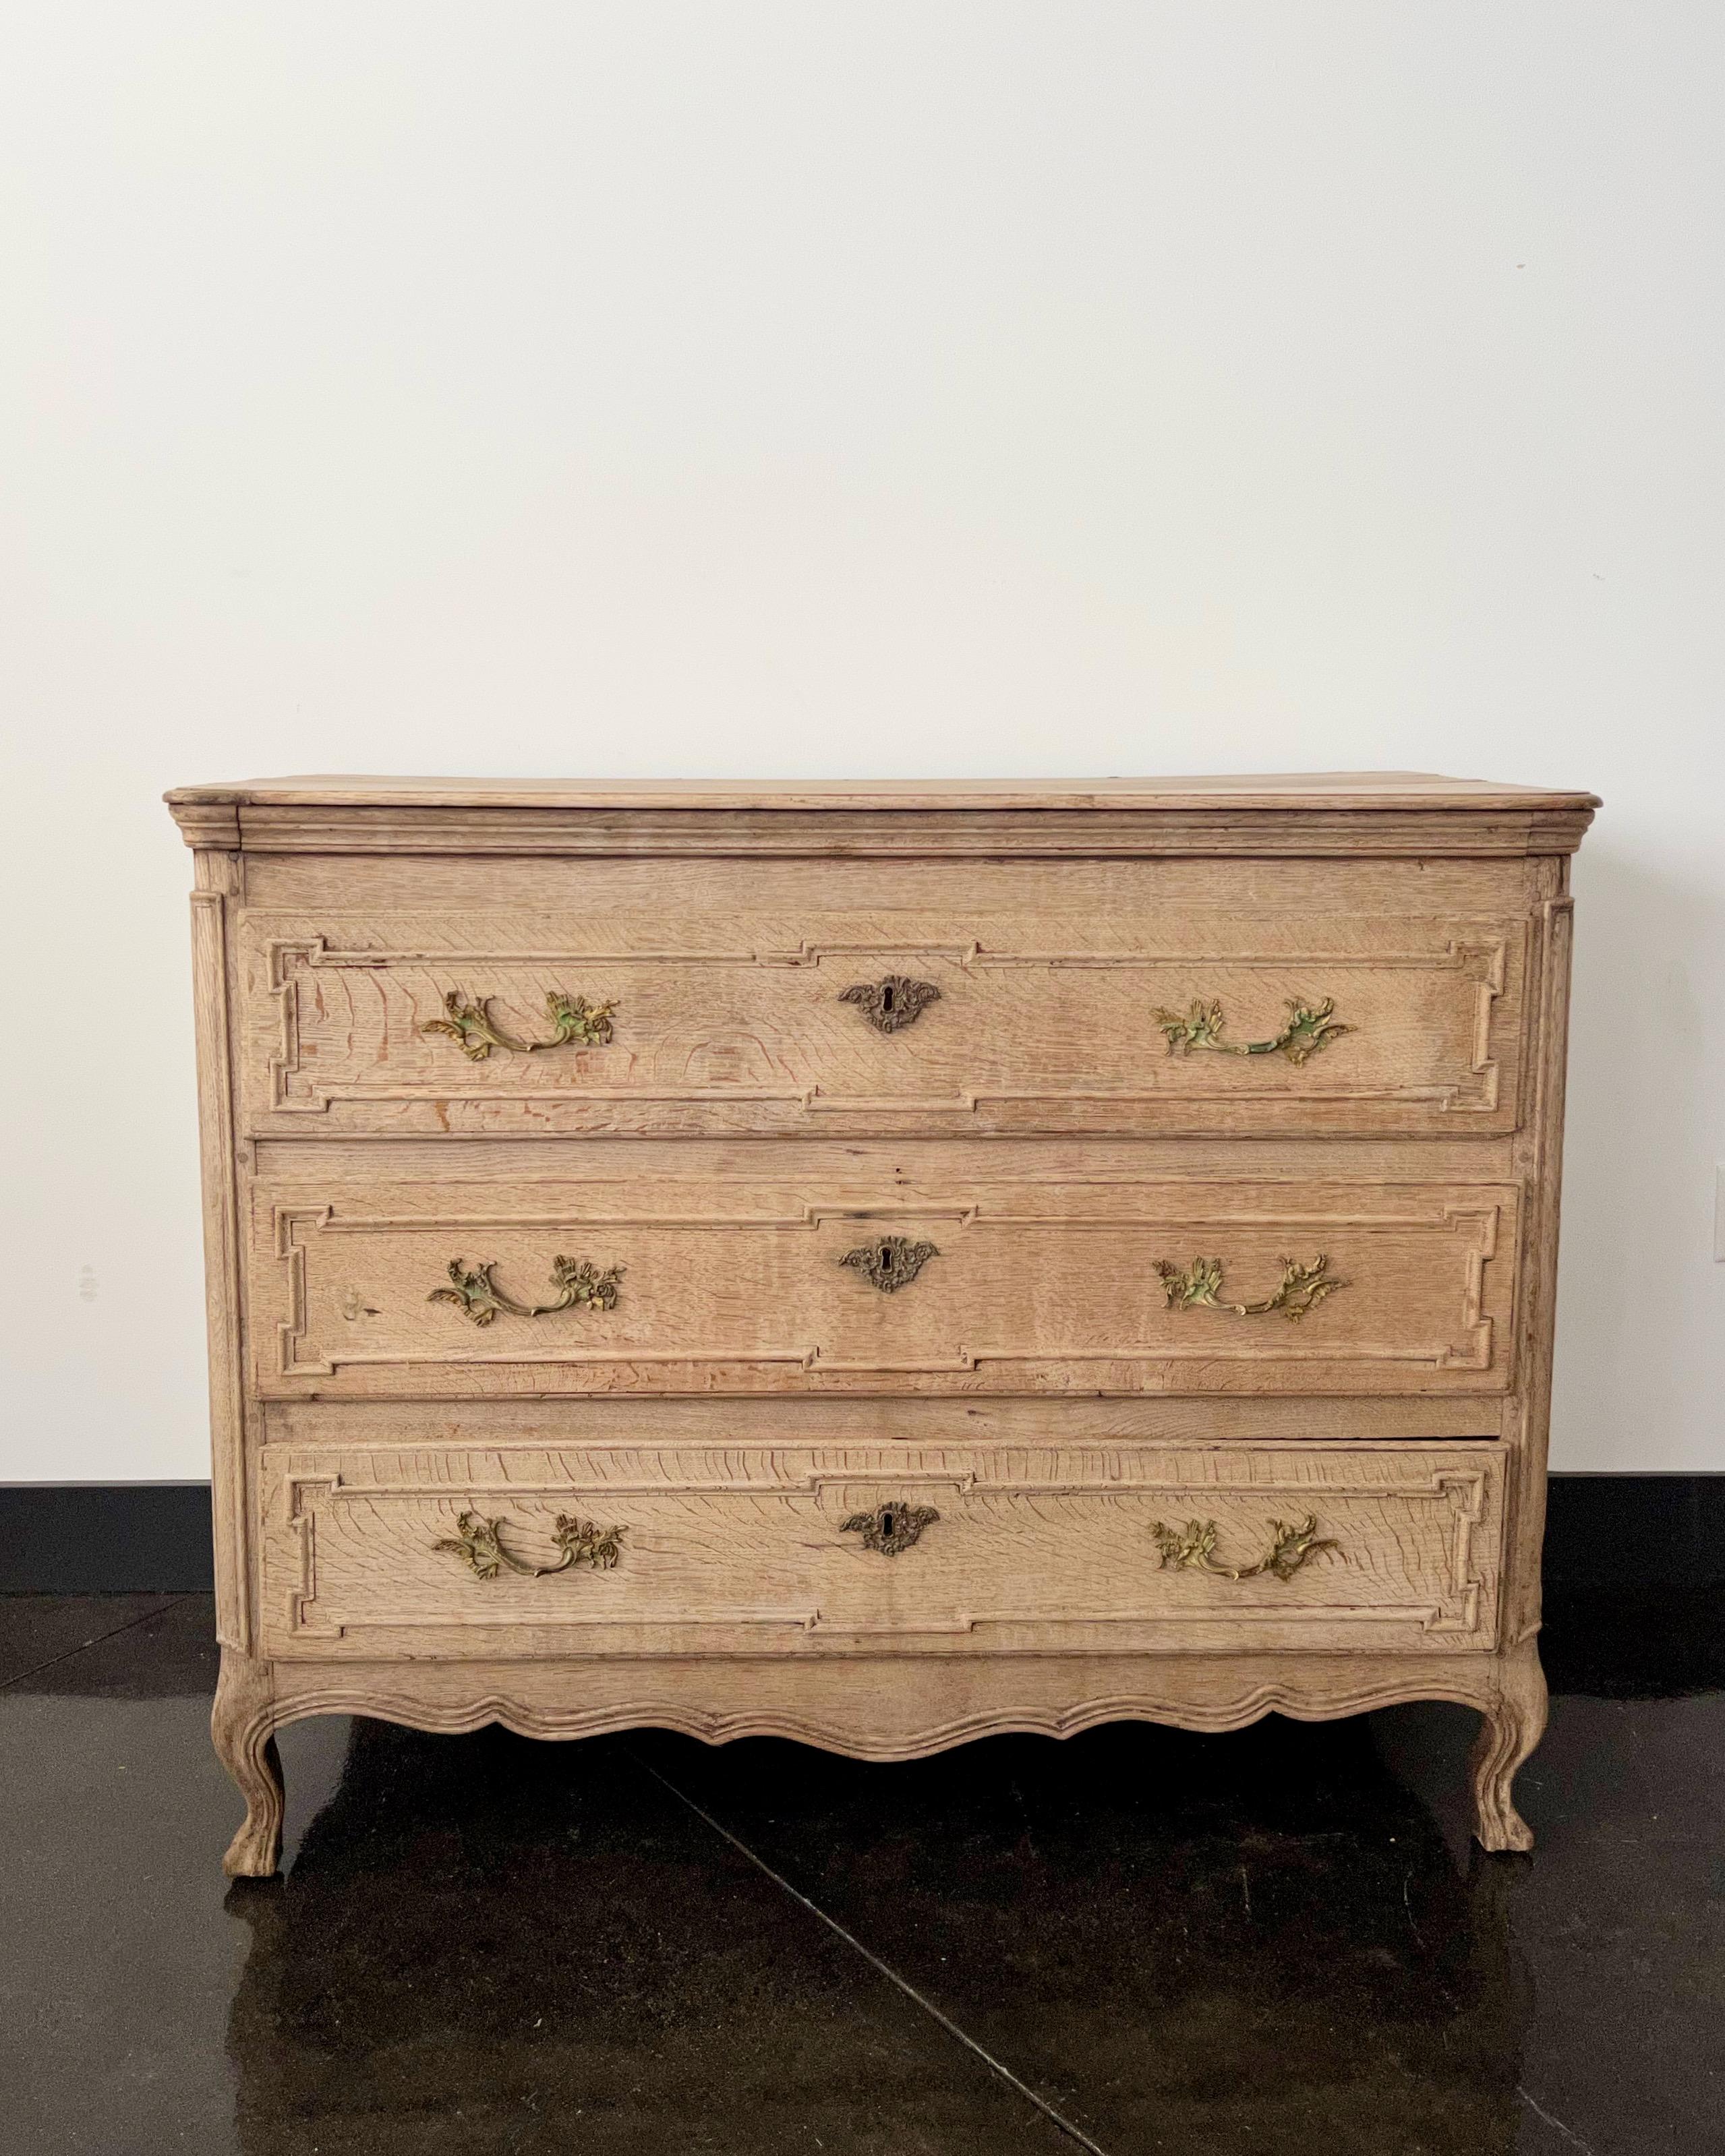 An exquisite French Louis XV/Louis XVI Transition period bleached oak commode with richly carved drawer fronts, decoratively carved apron and paneled sides and beautiful original hardware,
circa 1775.